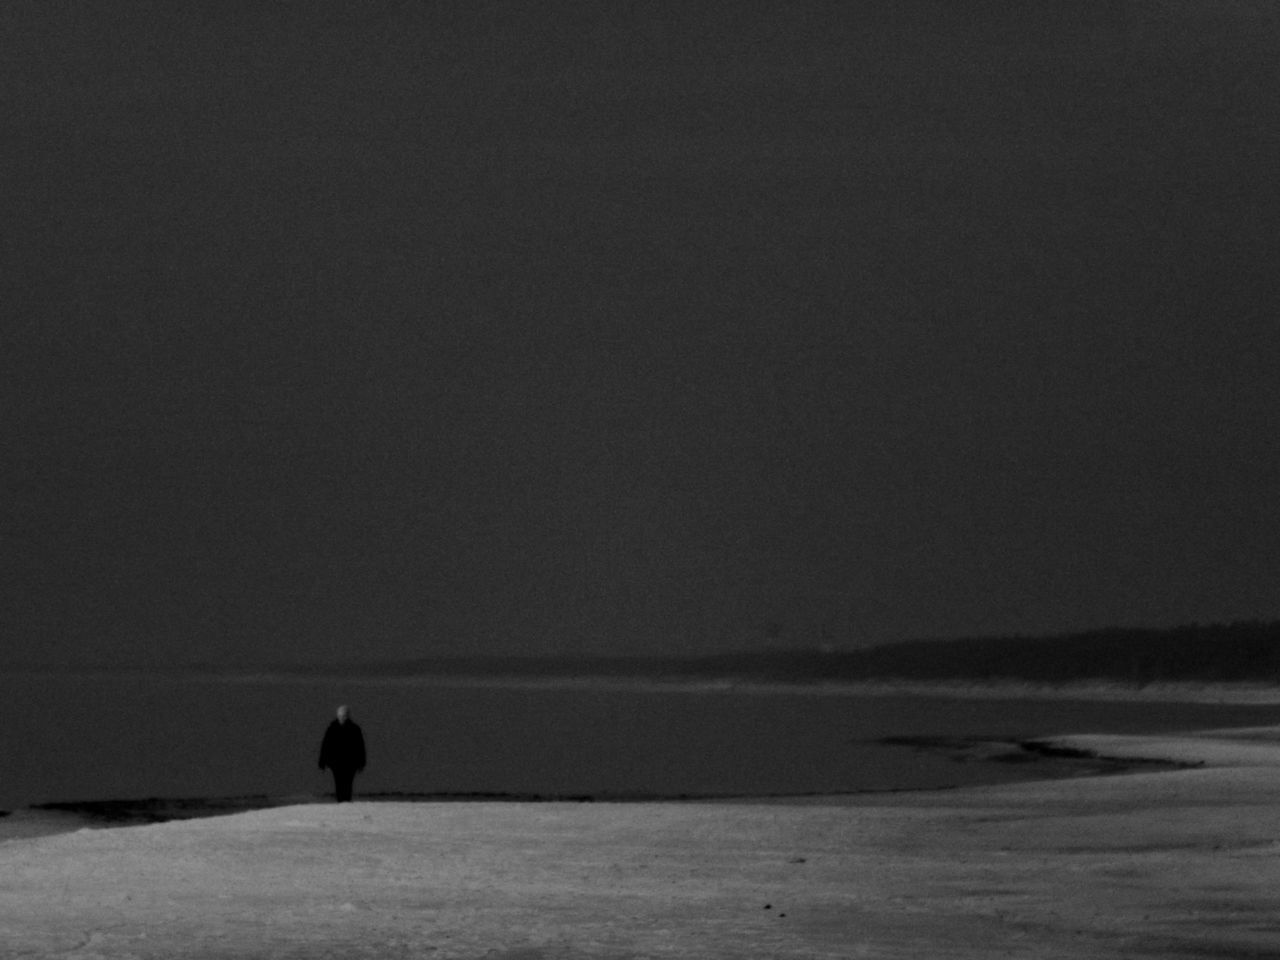 SILHOUETTE PERSON AT BEACH AGAINST SKY